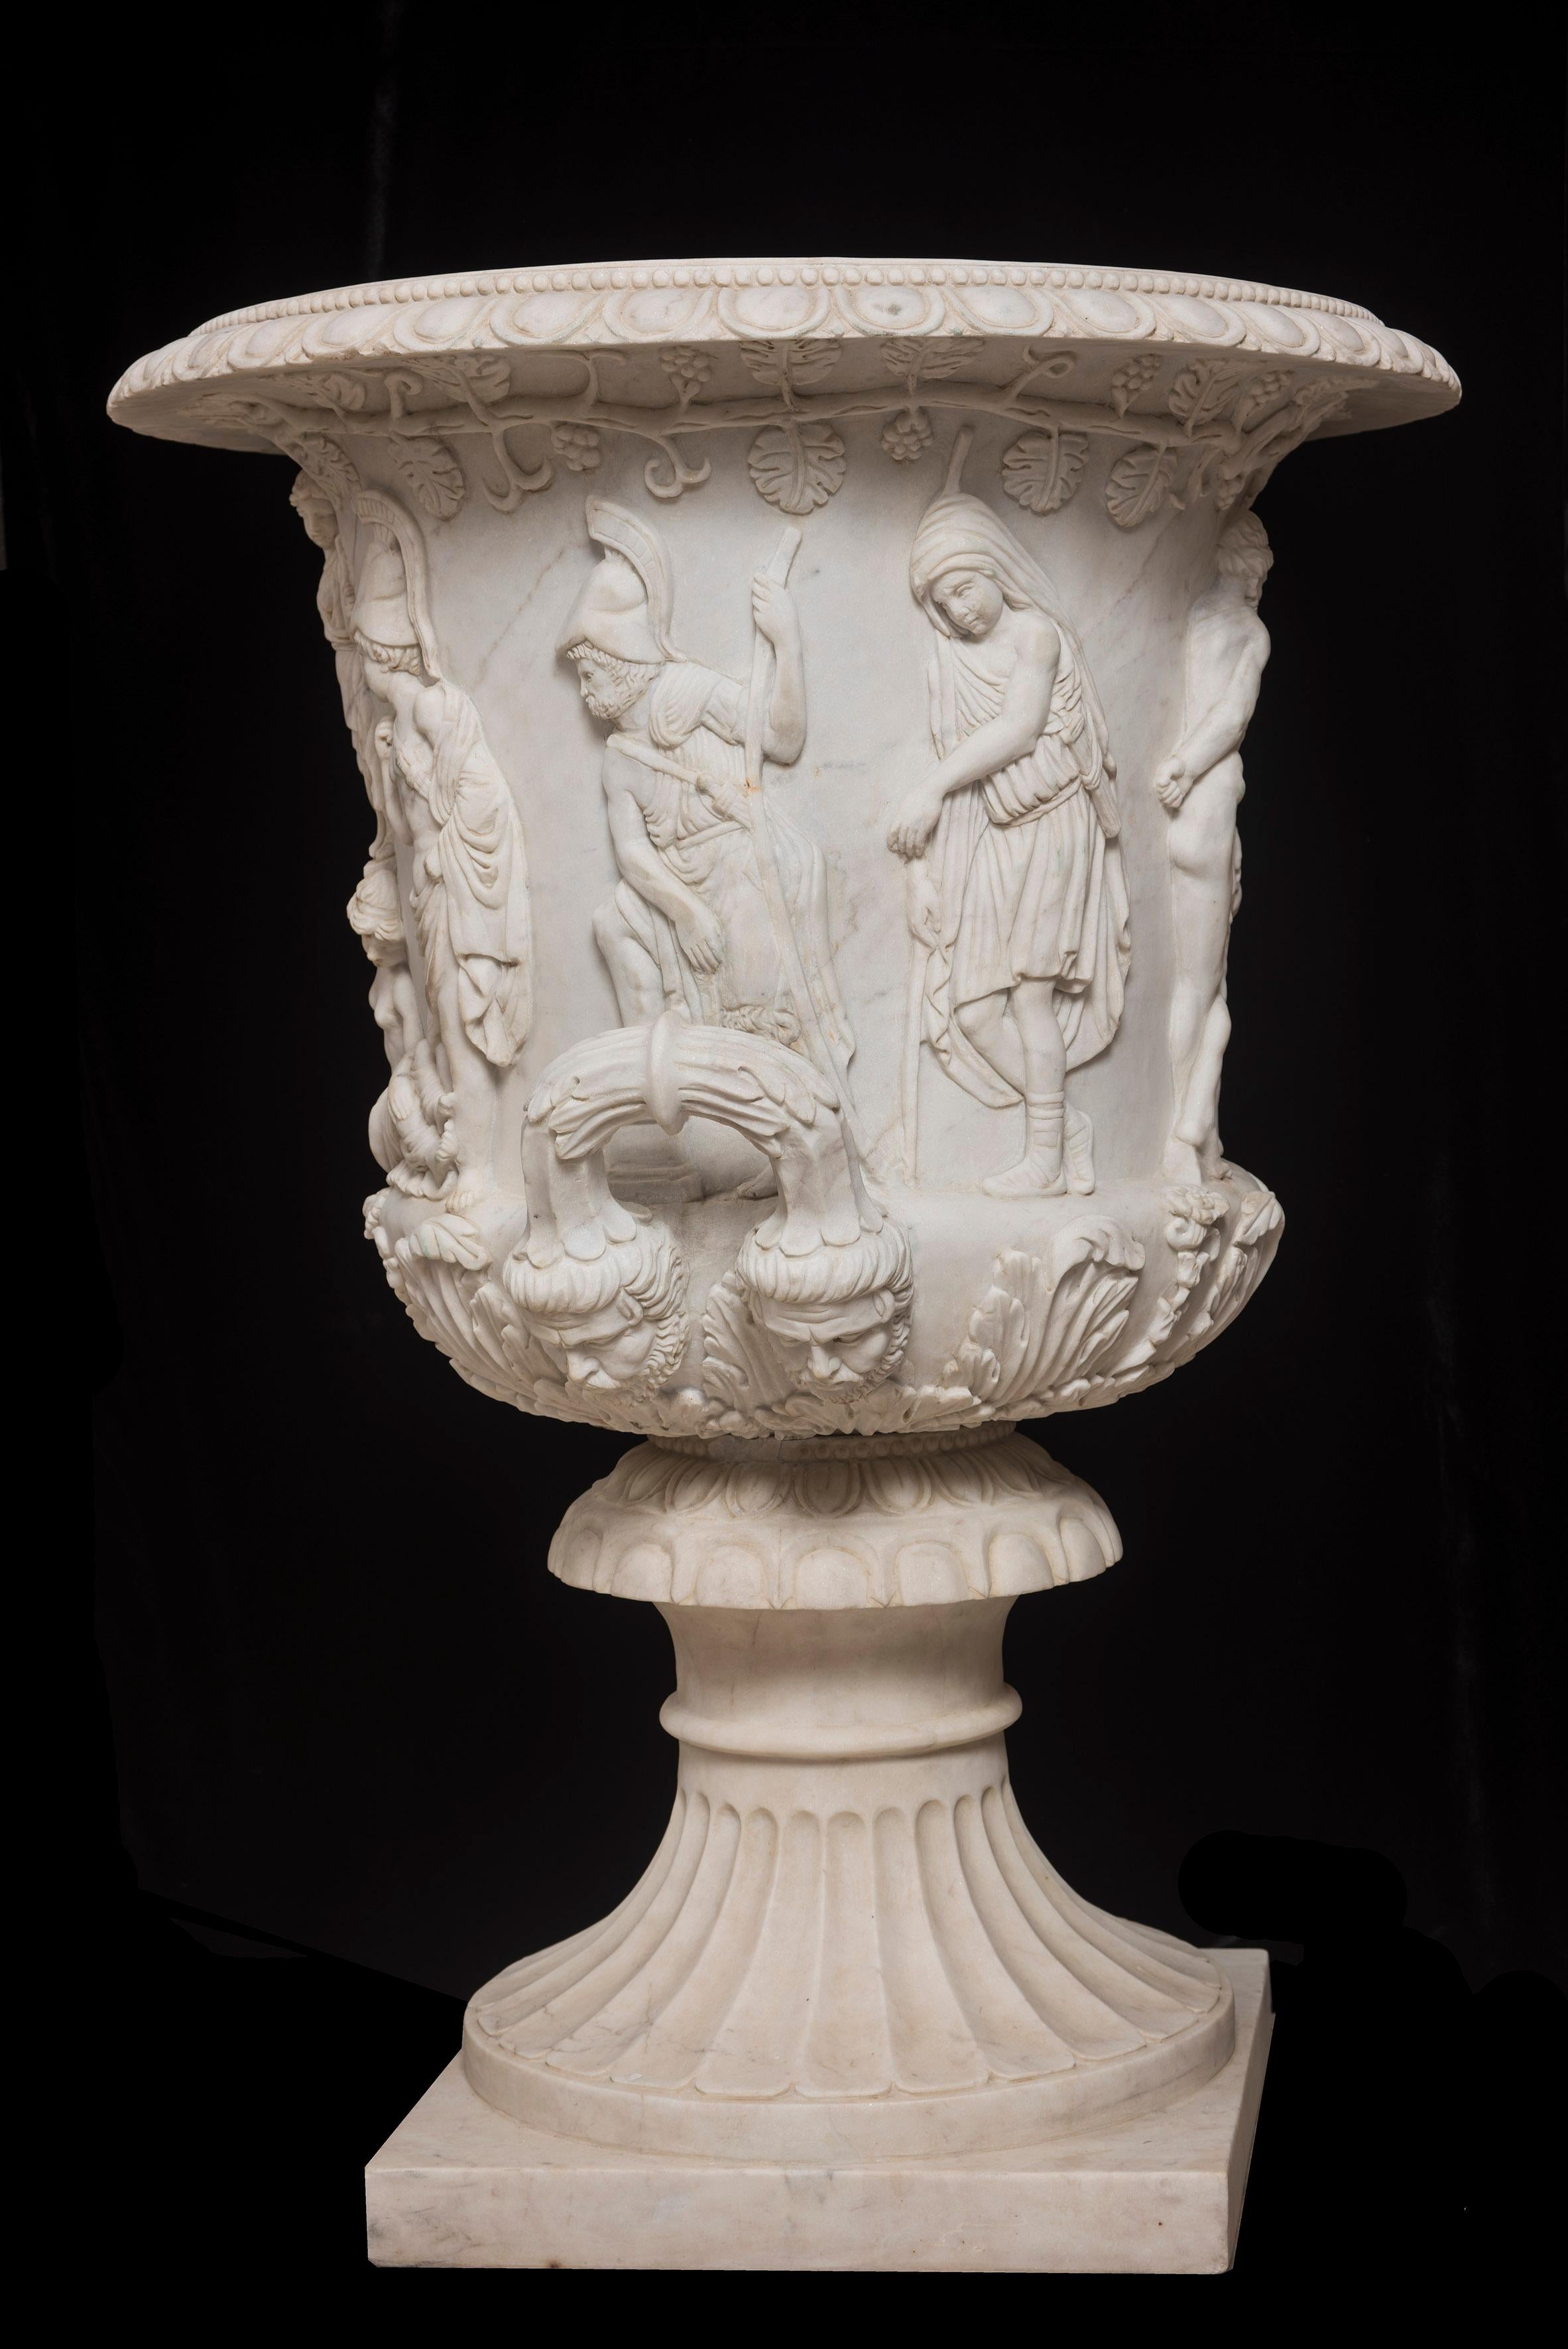 Contemporary Italian Statuary White Marble Medici Vase after the Classical Greek For Sale